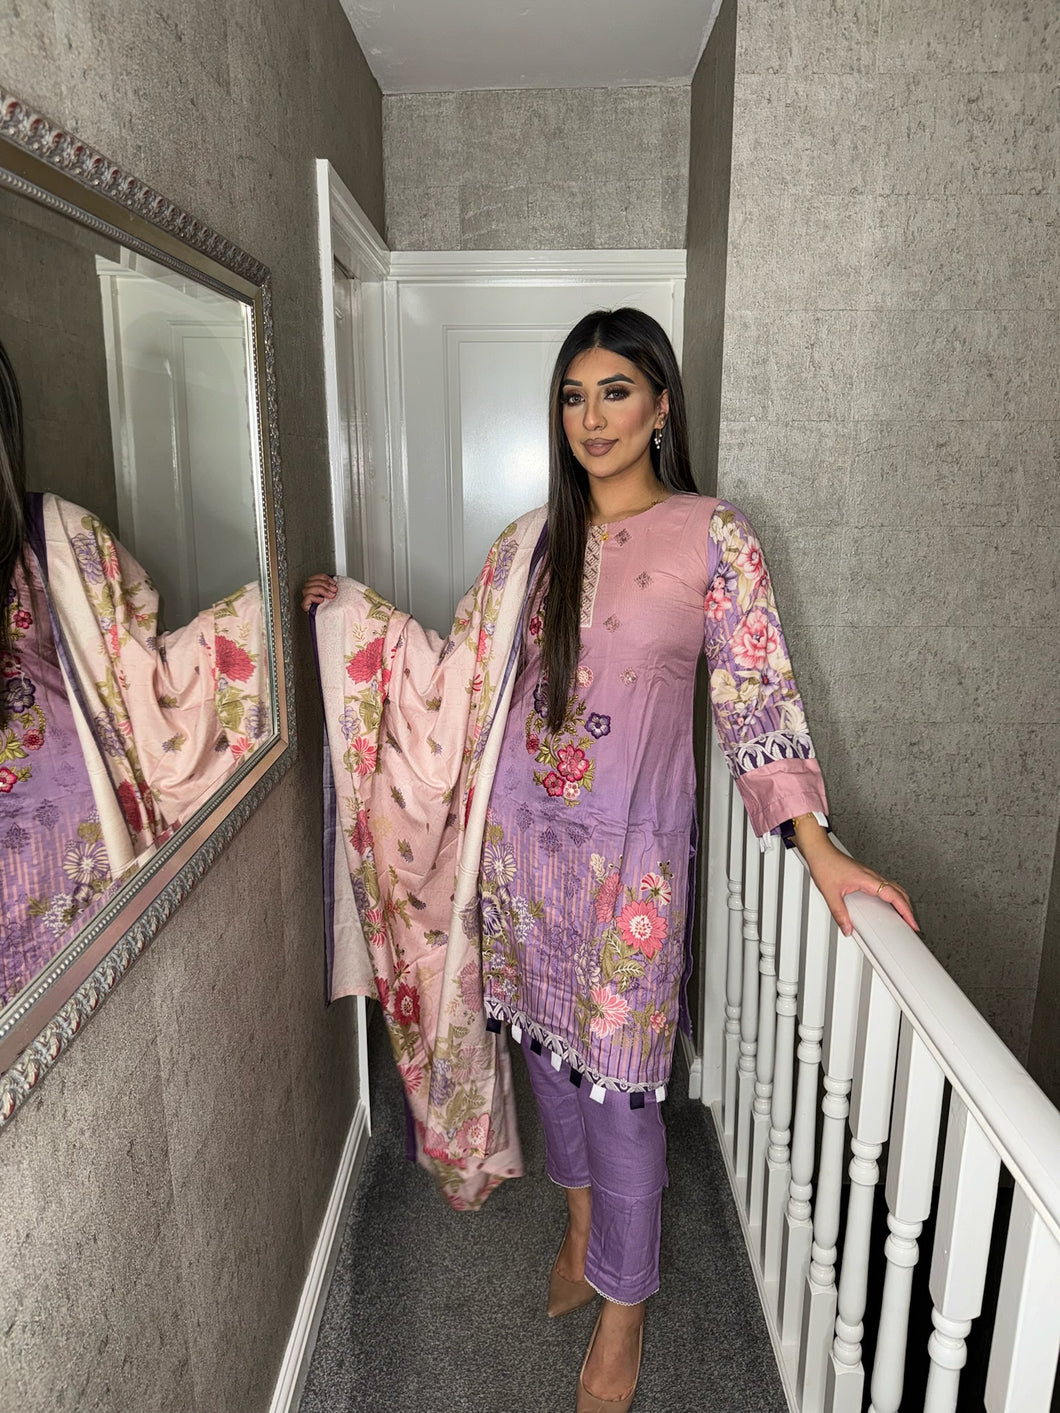 3PC Stitched LILAC PINK shalwar Suit Ready to wear DHANAK winter Wear with Dhanak dupatta DNE-0316